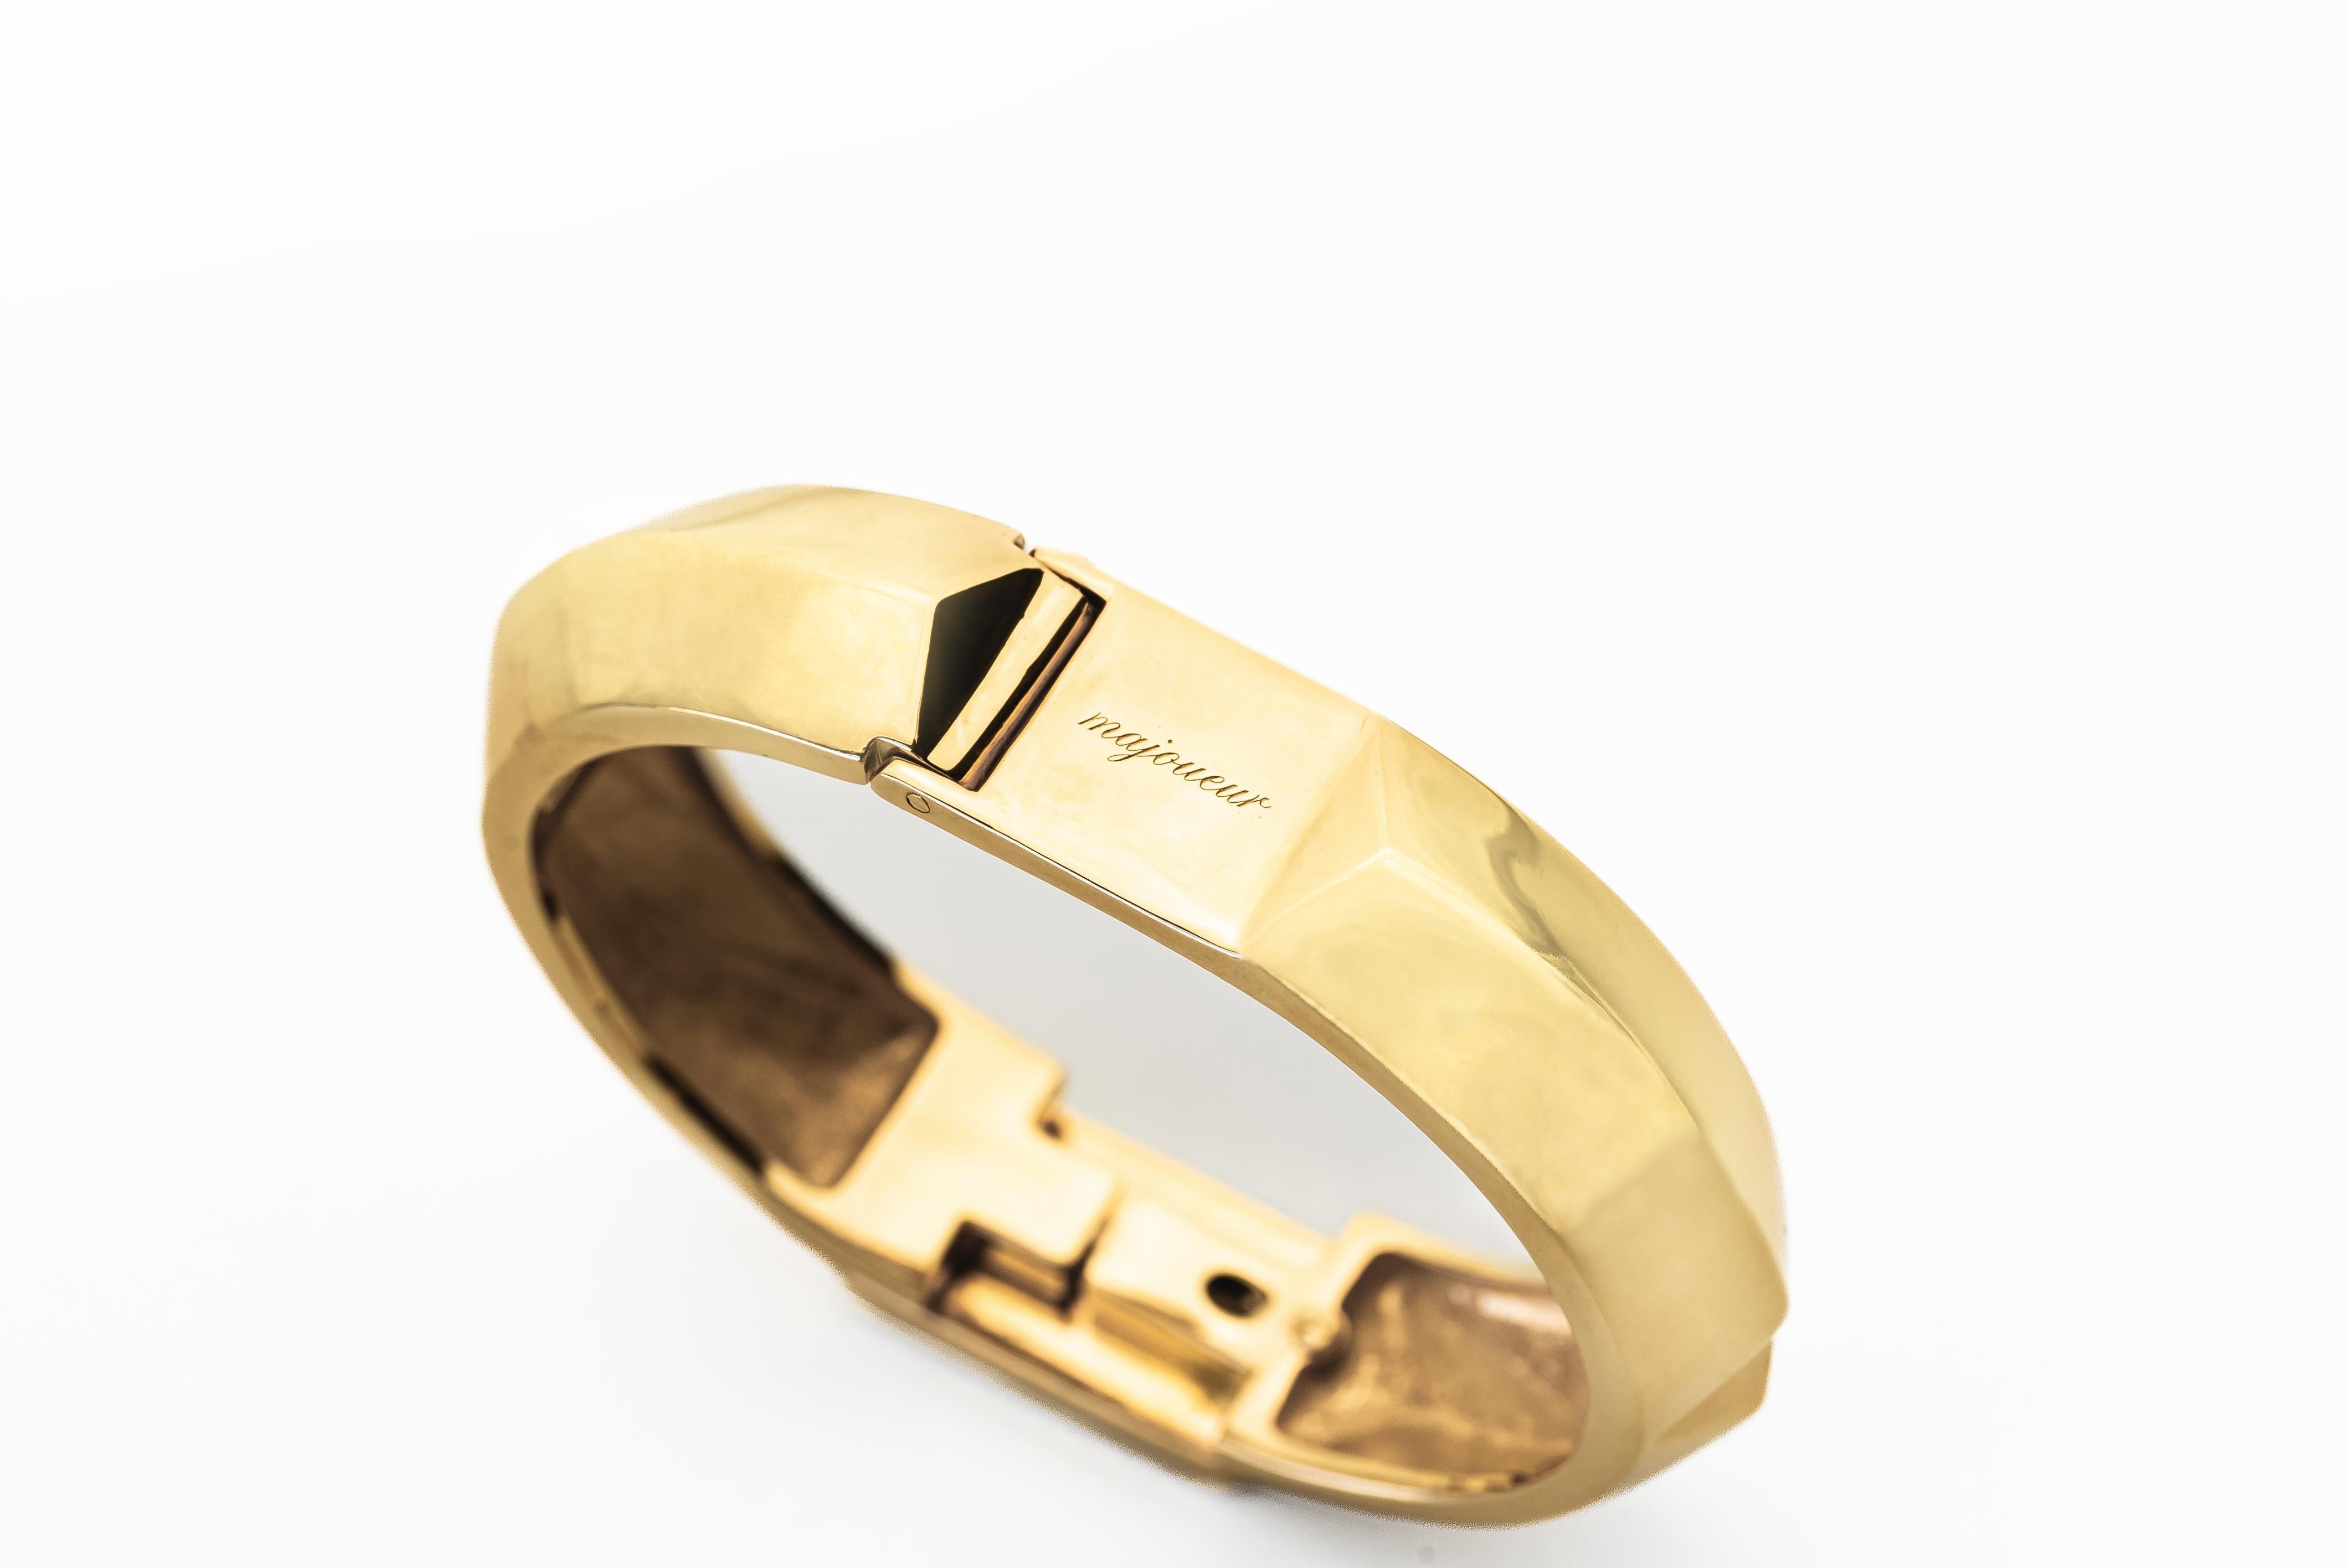 Embrace the liberating opportunity to authentically express your true self. Within this exquisite bangle, the opulent radiance of pure gold harmoniously juxtaposes with the ethereal, transparent azure hues, expertly crafted through the culmination